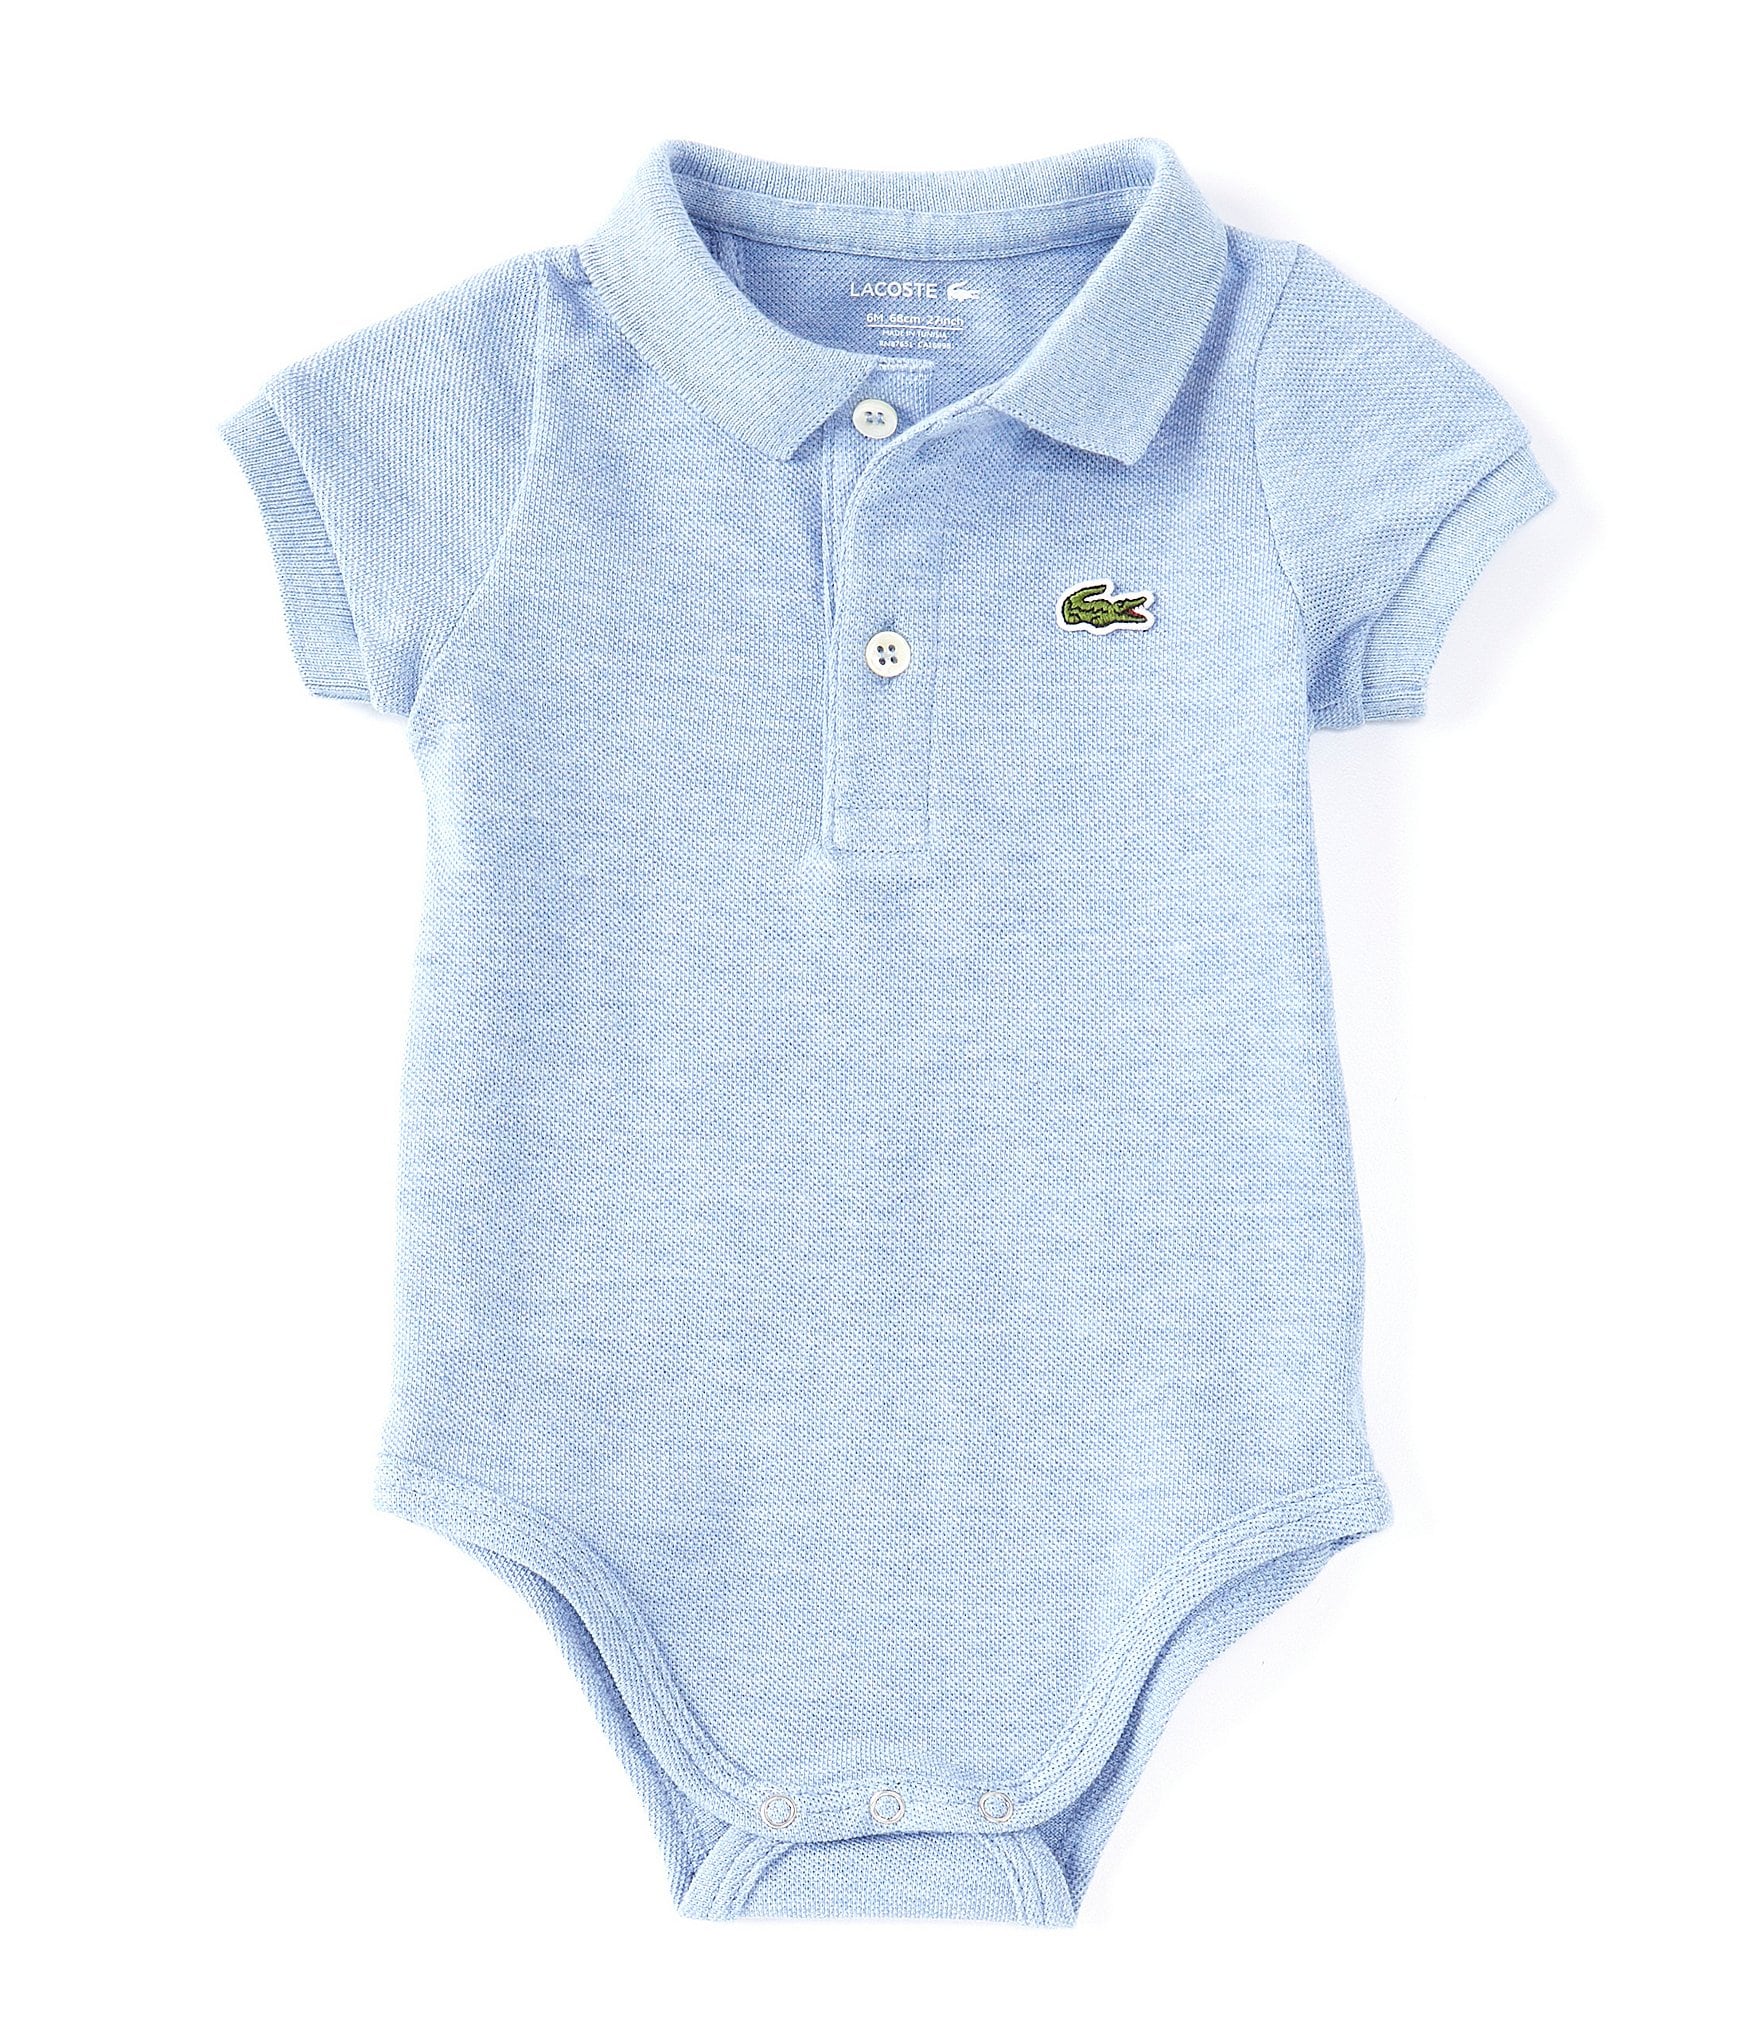 Termisk tackle usund Lacoste Baby Boys Clothes 0-24 Months | Dillard's